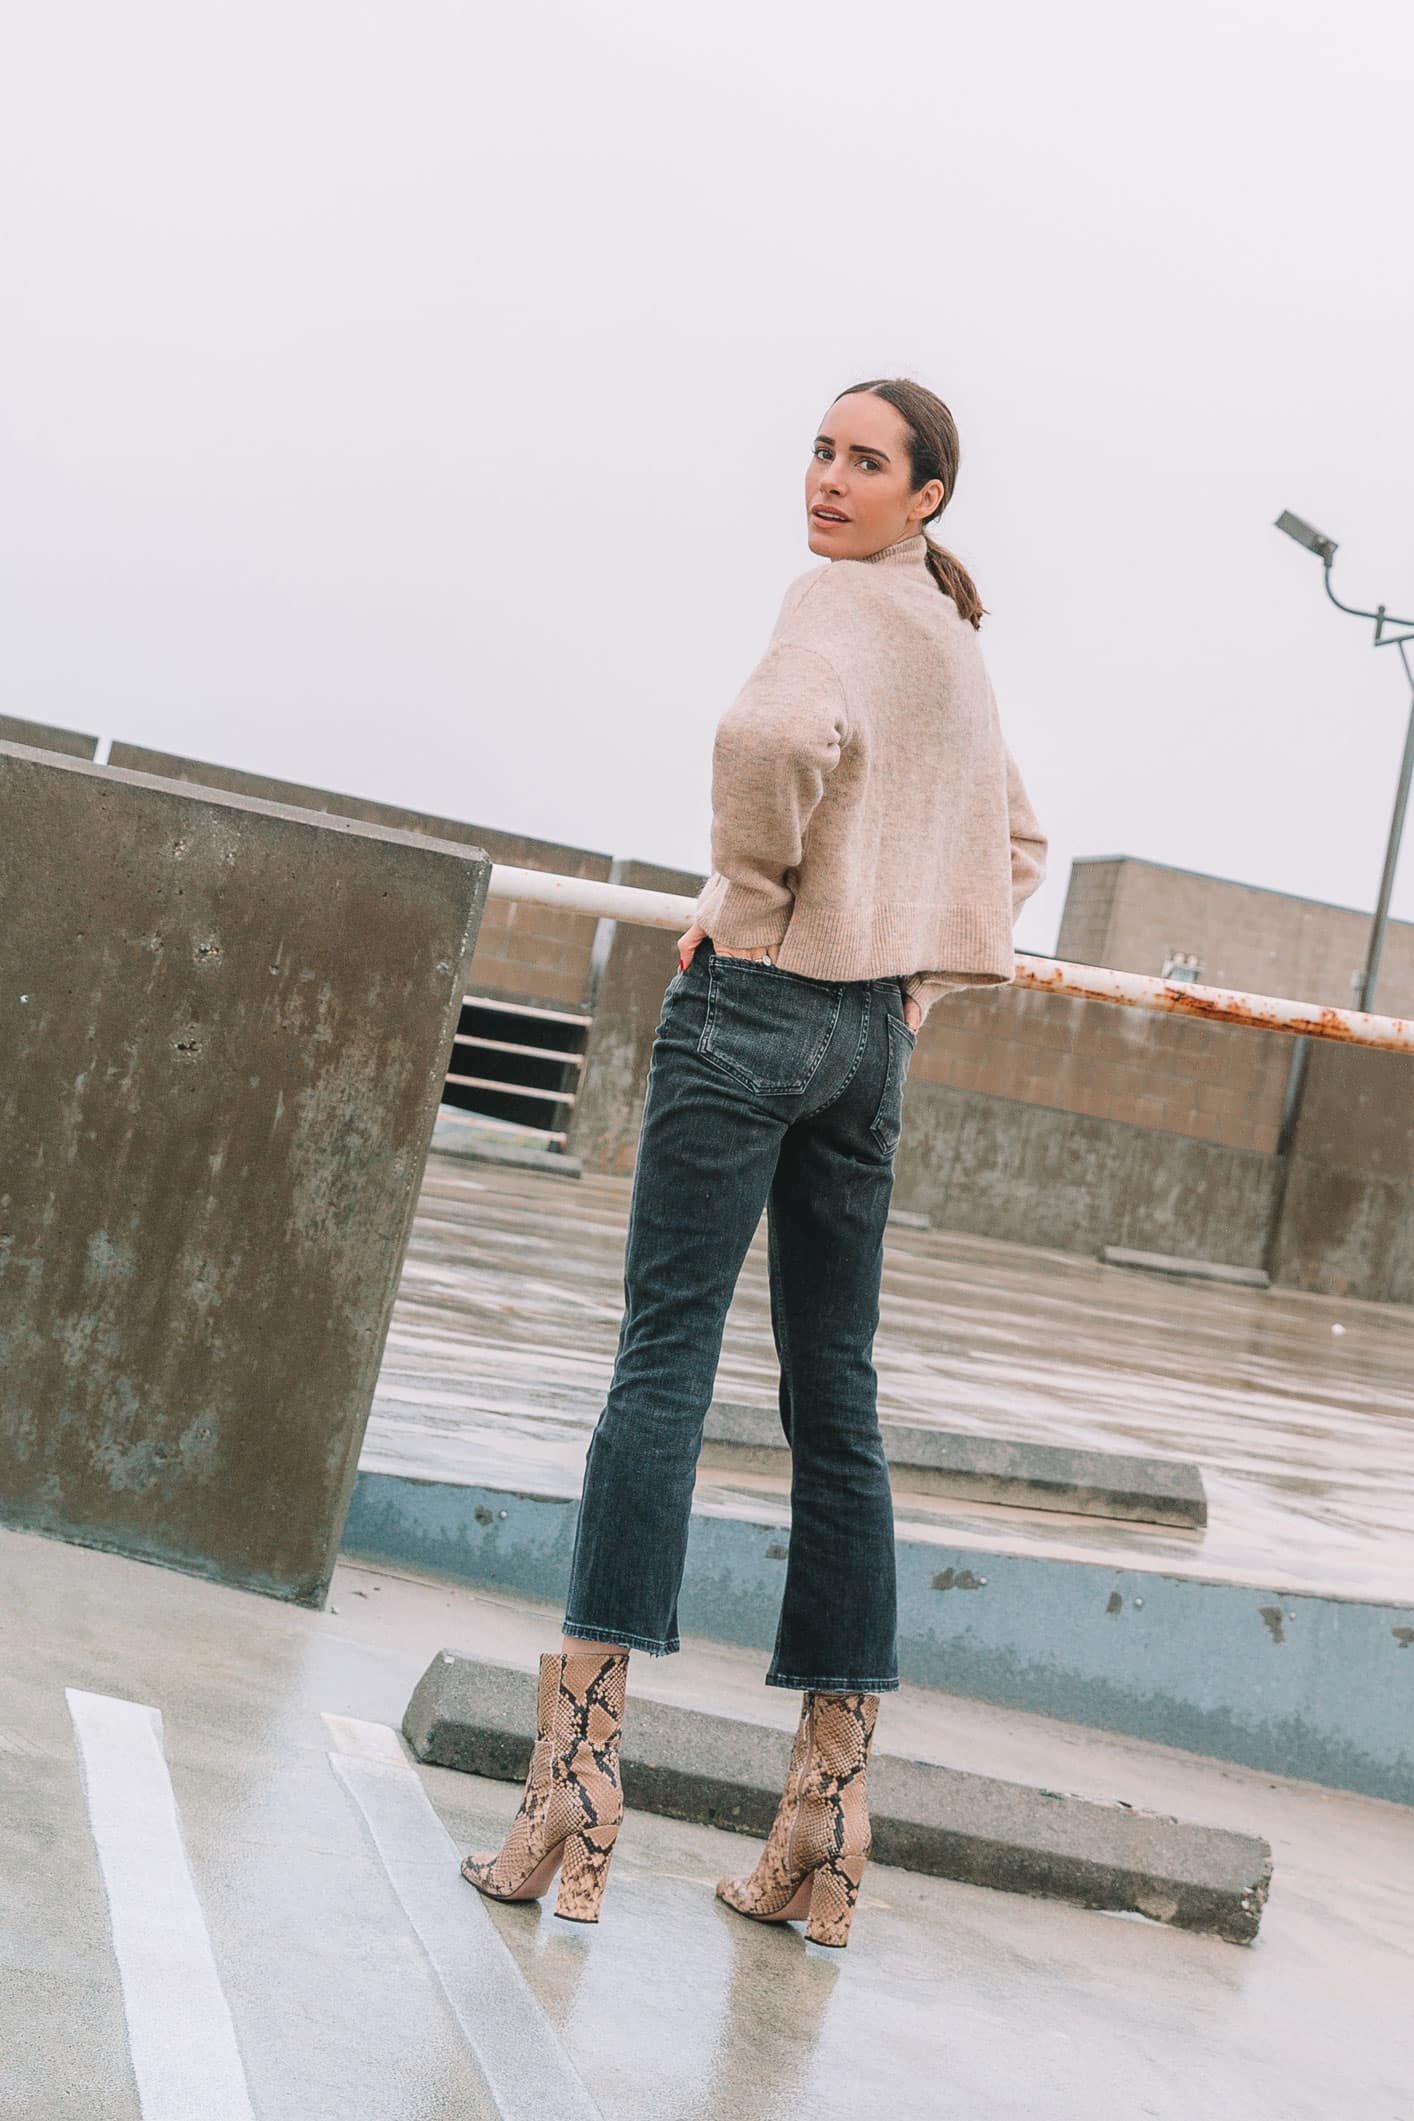 Louise Roe fashion tips on how to style jeans for work